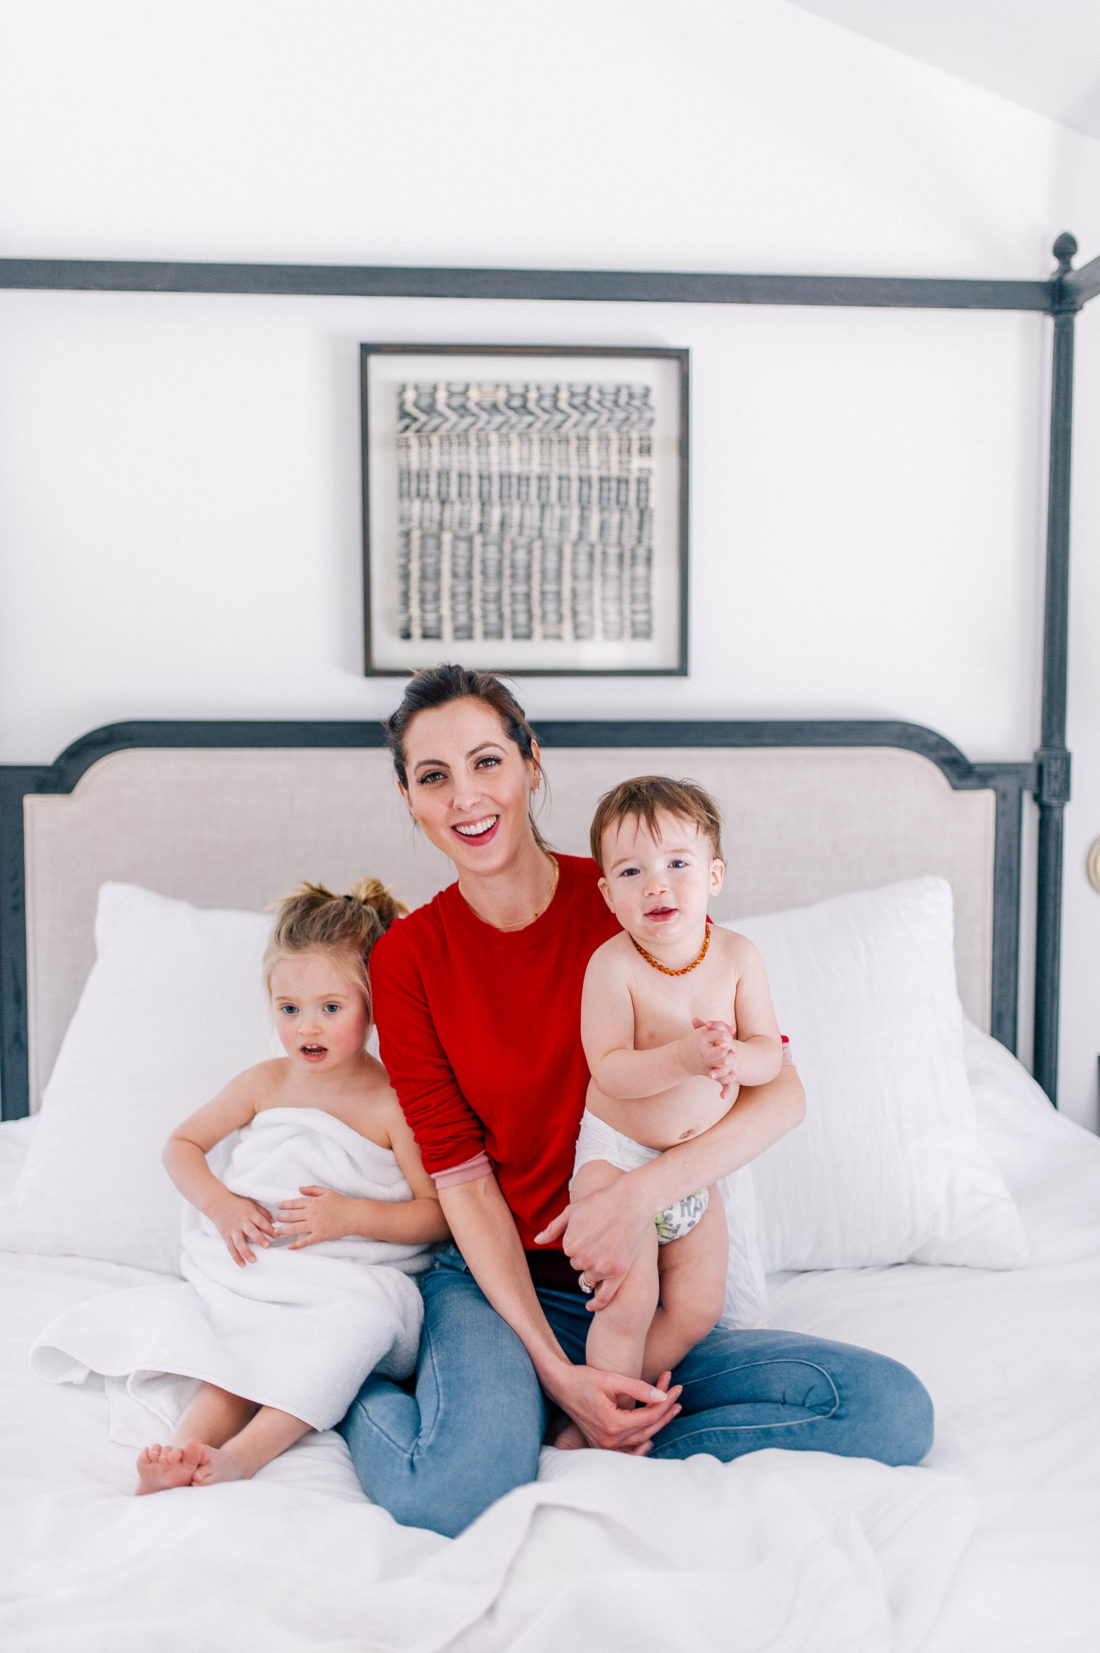 Eva Amurri Martino puts both of her children to be using her solo bedtime routine when her husband is out of town